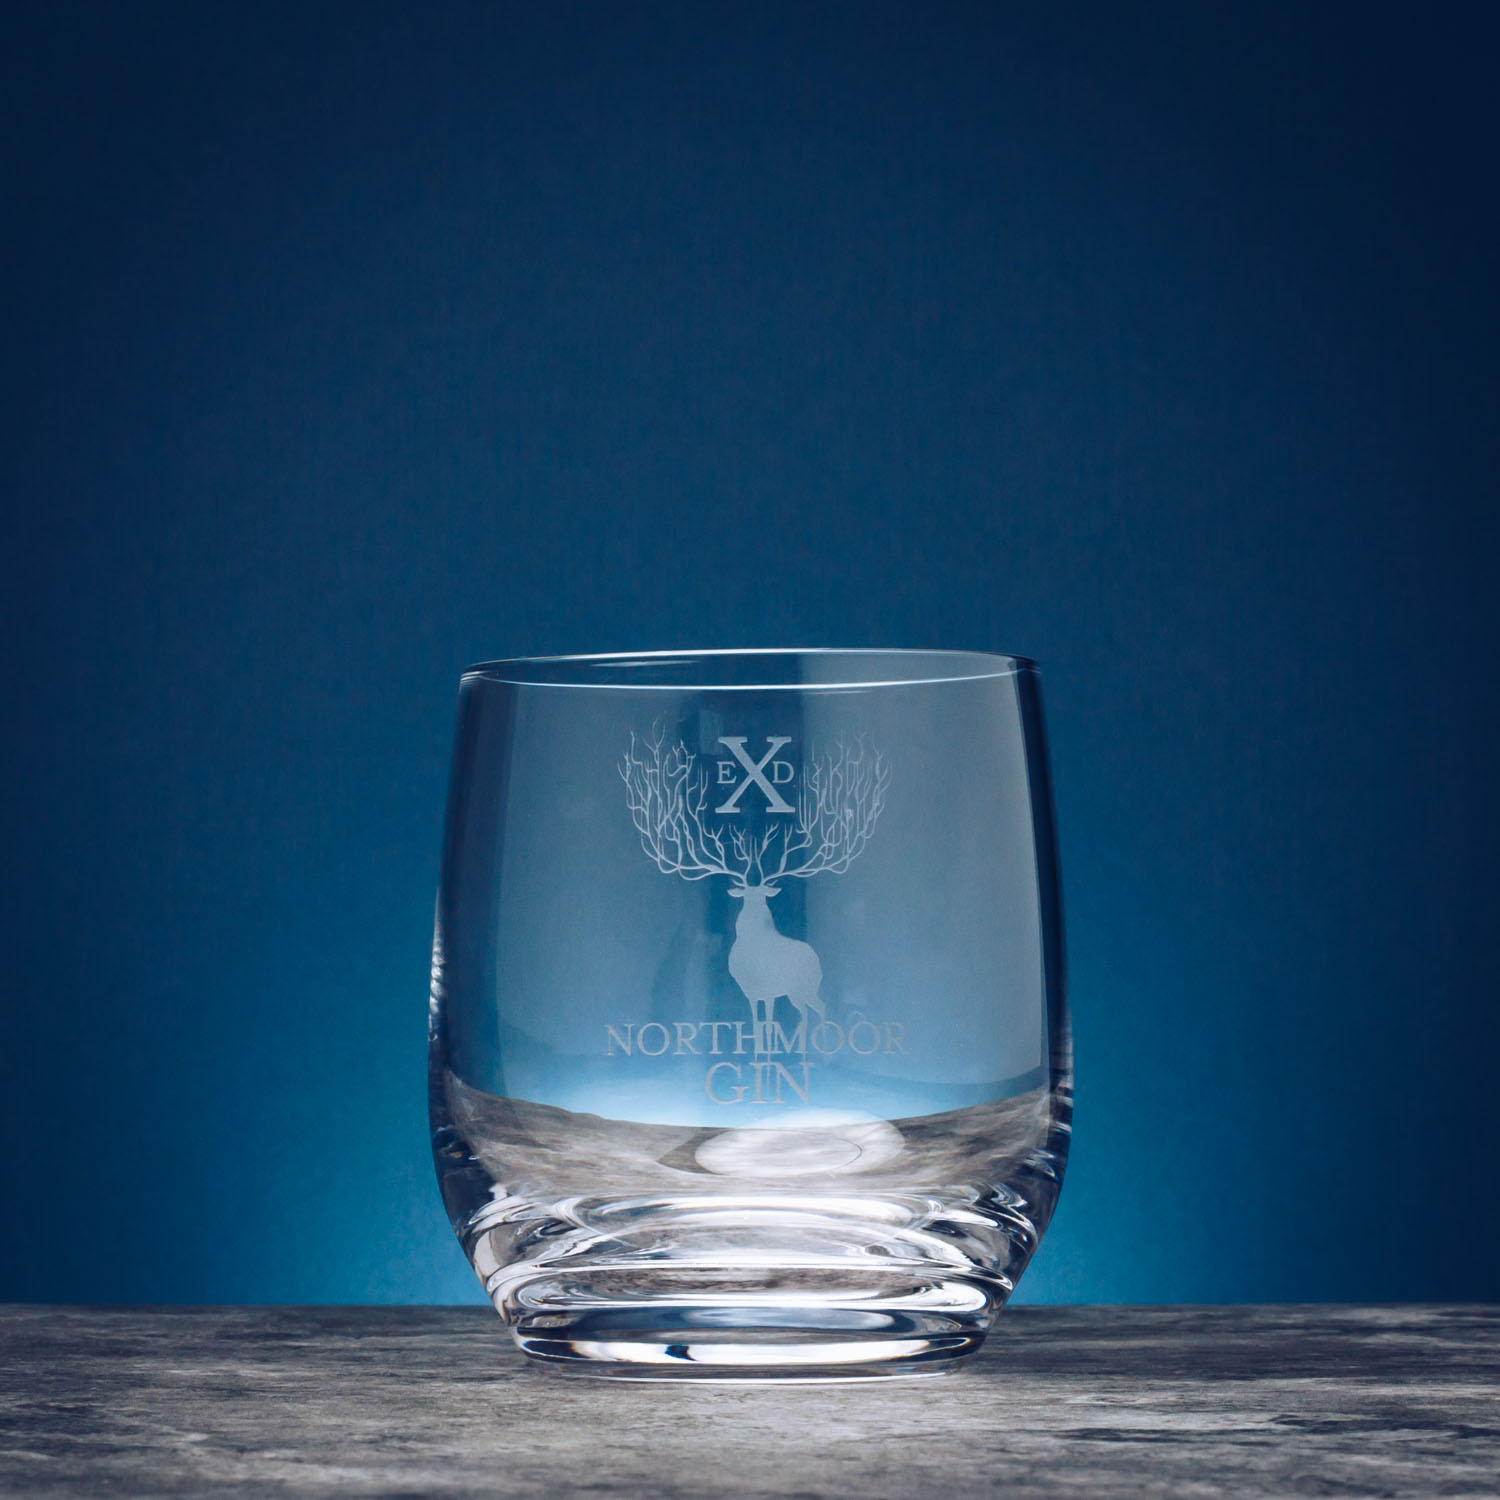 Exclusive Whisky Tumbler Glass Set by Dartington Online